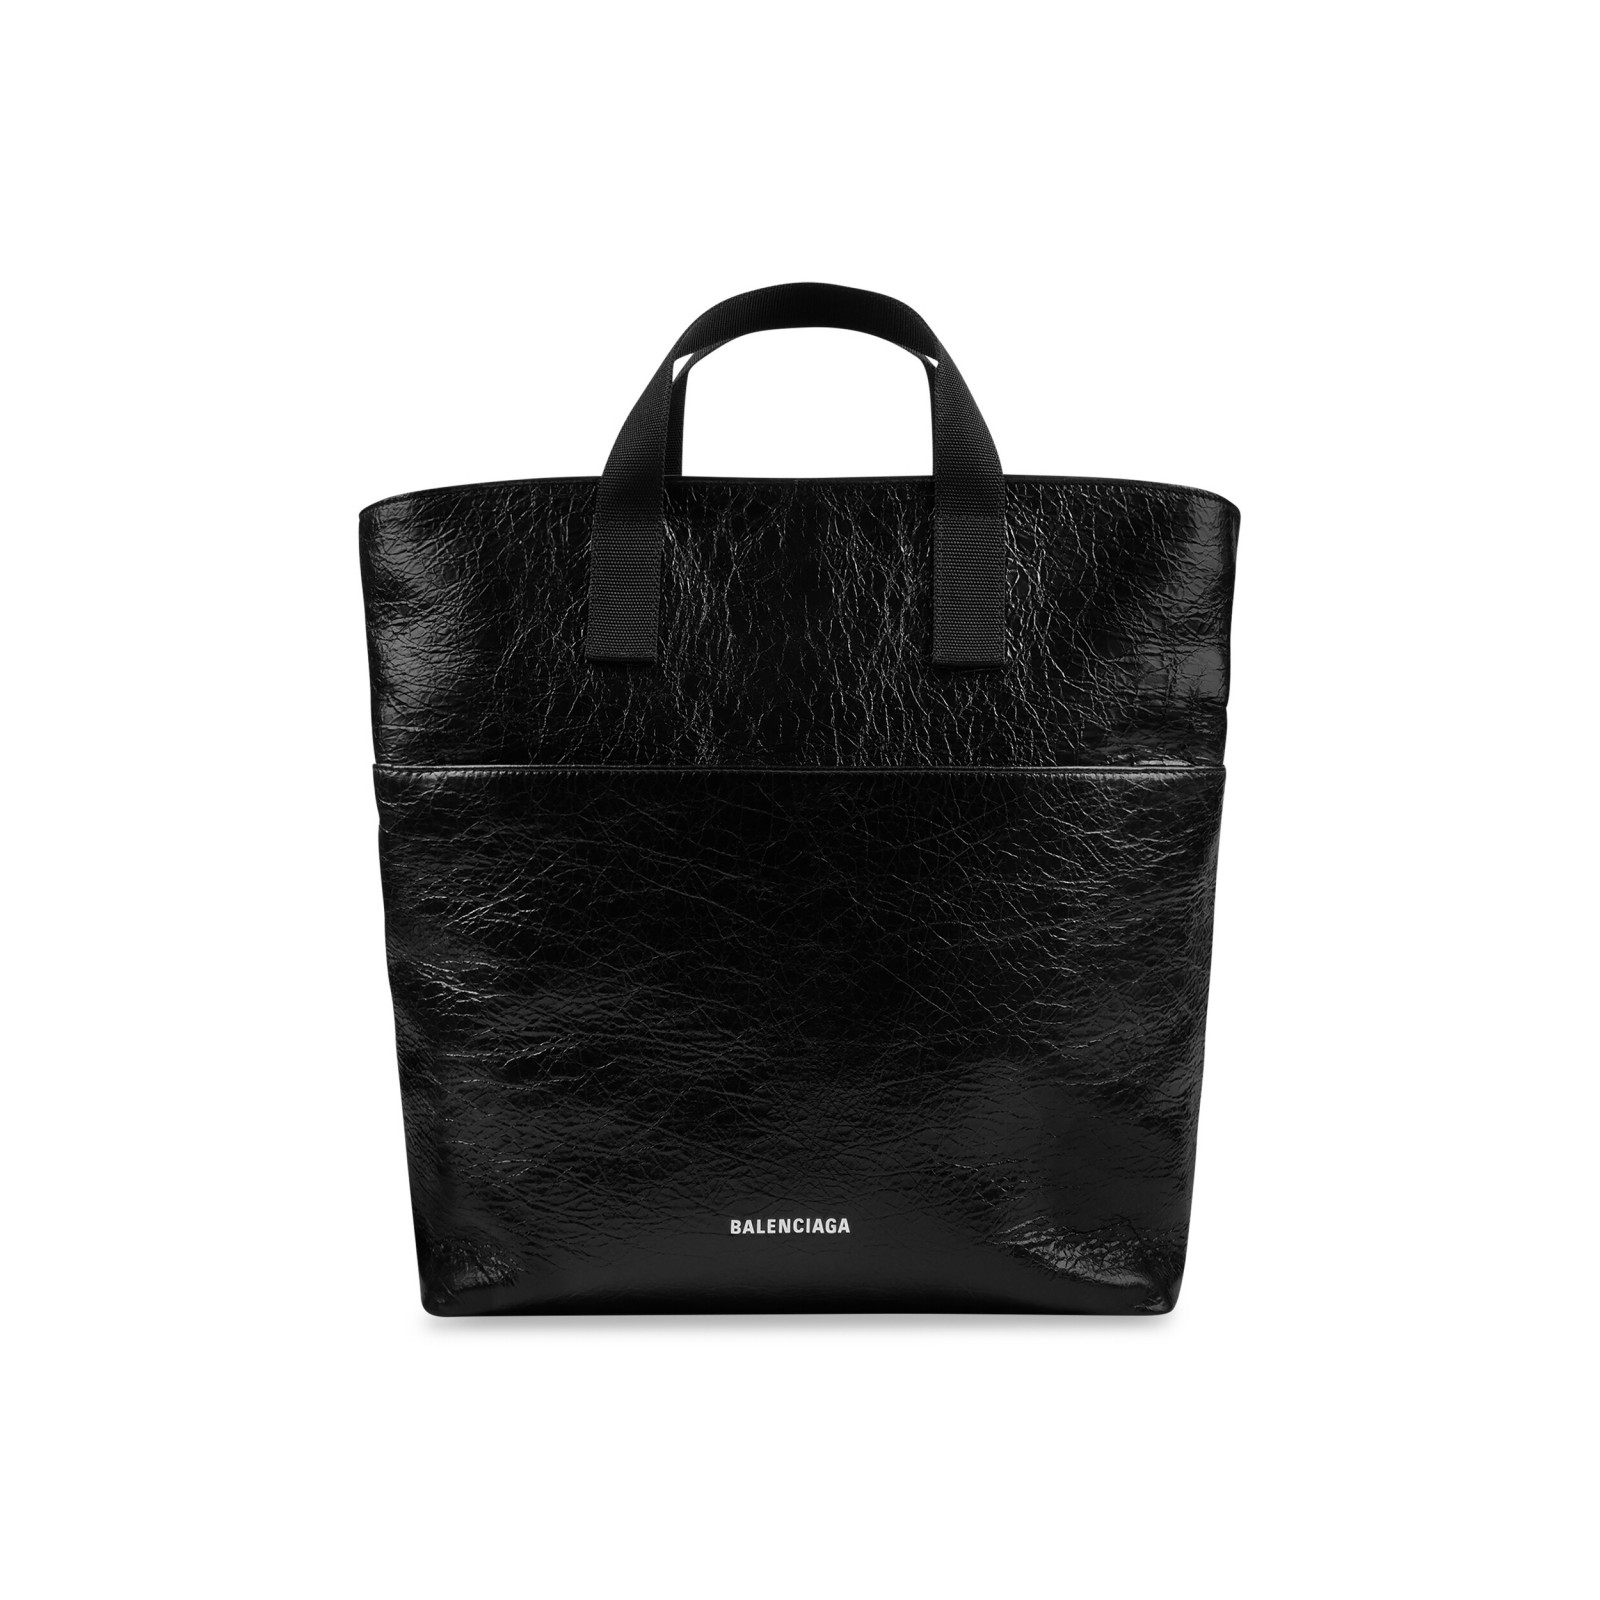 EXPLORER TOTE BAG WITH STRAP